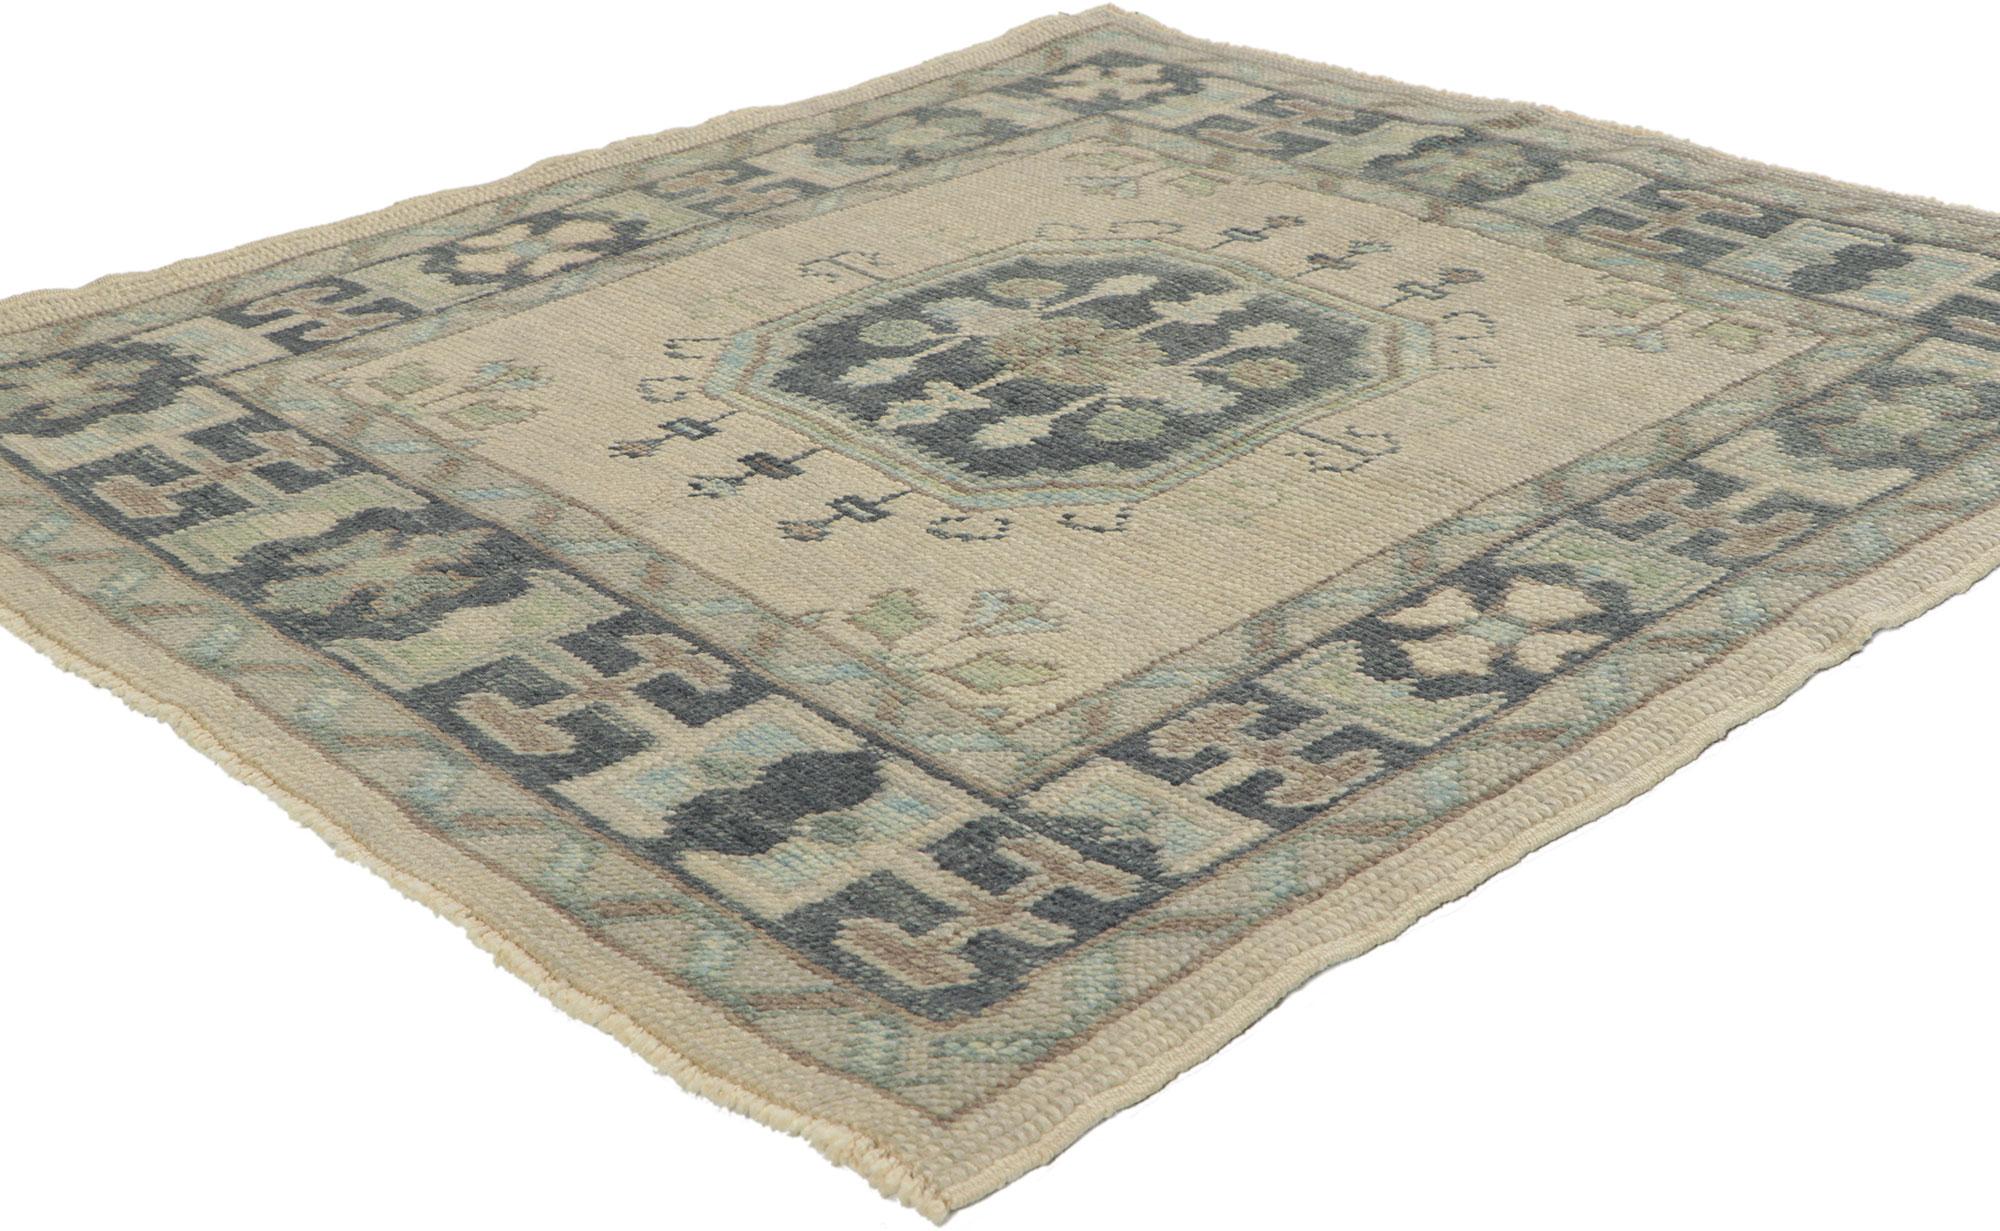 53812 new Turkish Oushak square accent rug with Modern style, 03'06 x 03'10. Polished and playful, this hand-knotted wool contemporary Turkish Oushak accent rug beautifully embodies a modern style. The abrashed bluish-grayish field features a